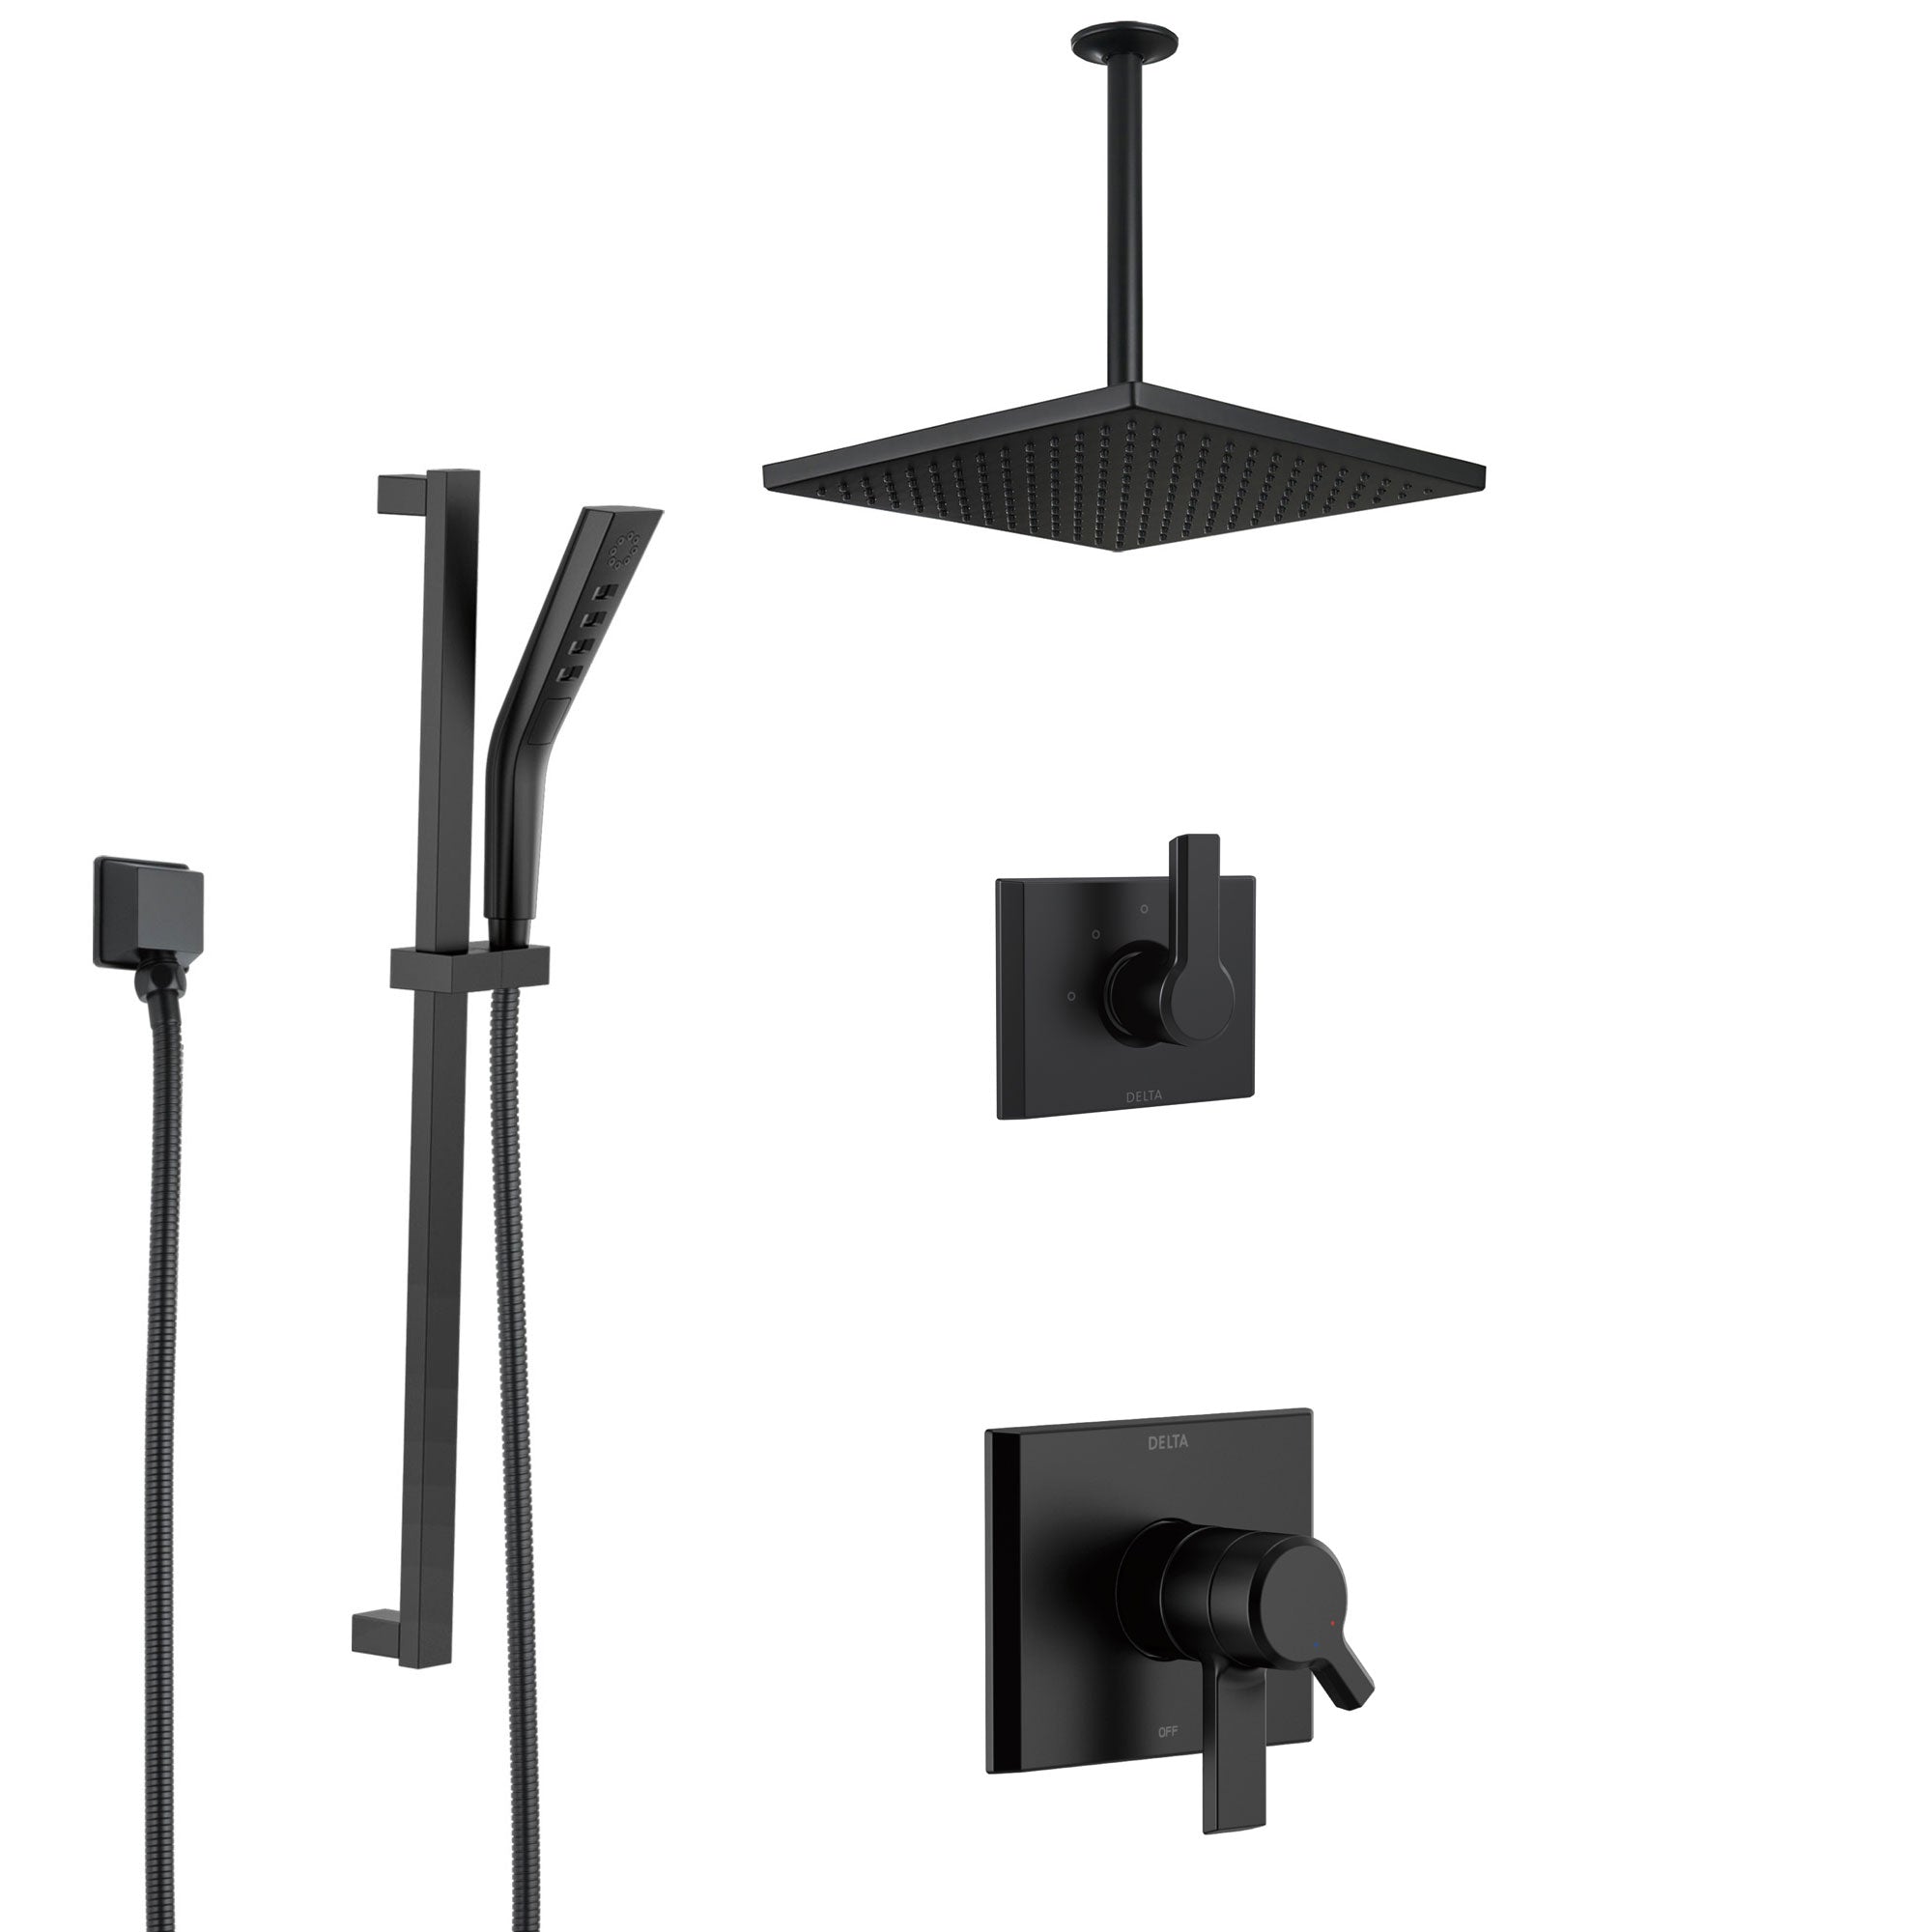 Delta Pivotal Matte Black Finish Square Dual Control Shower System with Large Ceiling Mount Rain Showerhead and Slidebar Mount Hand Sprayer SS17993BL2